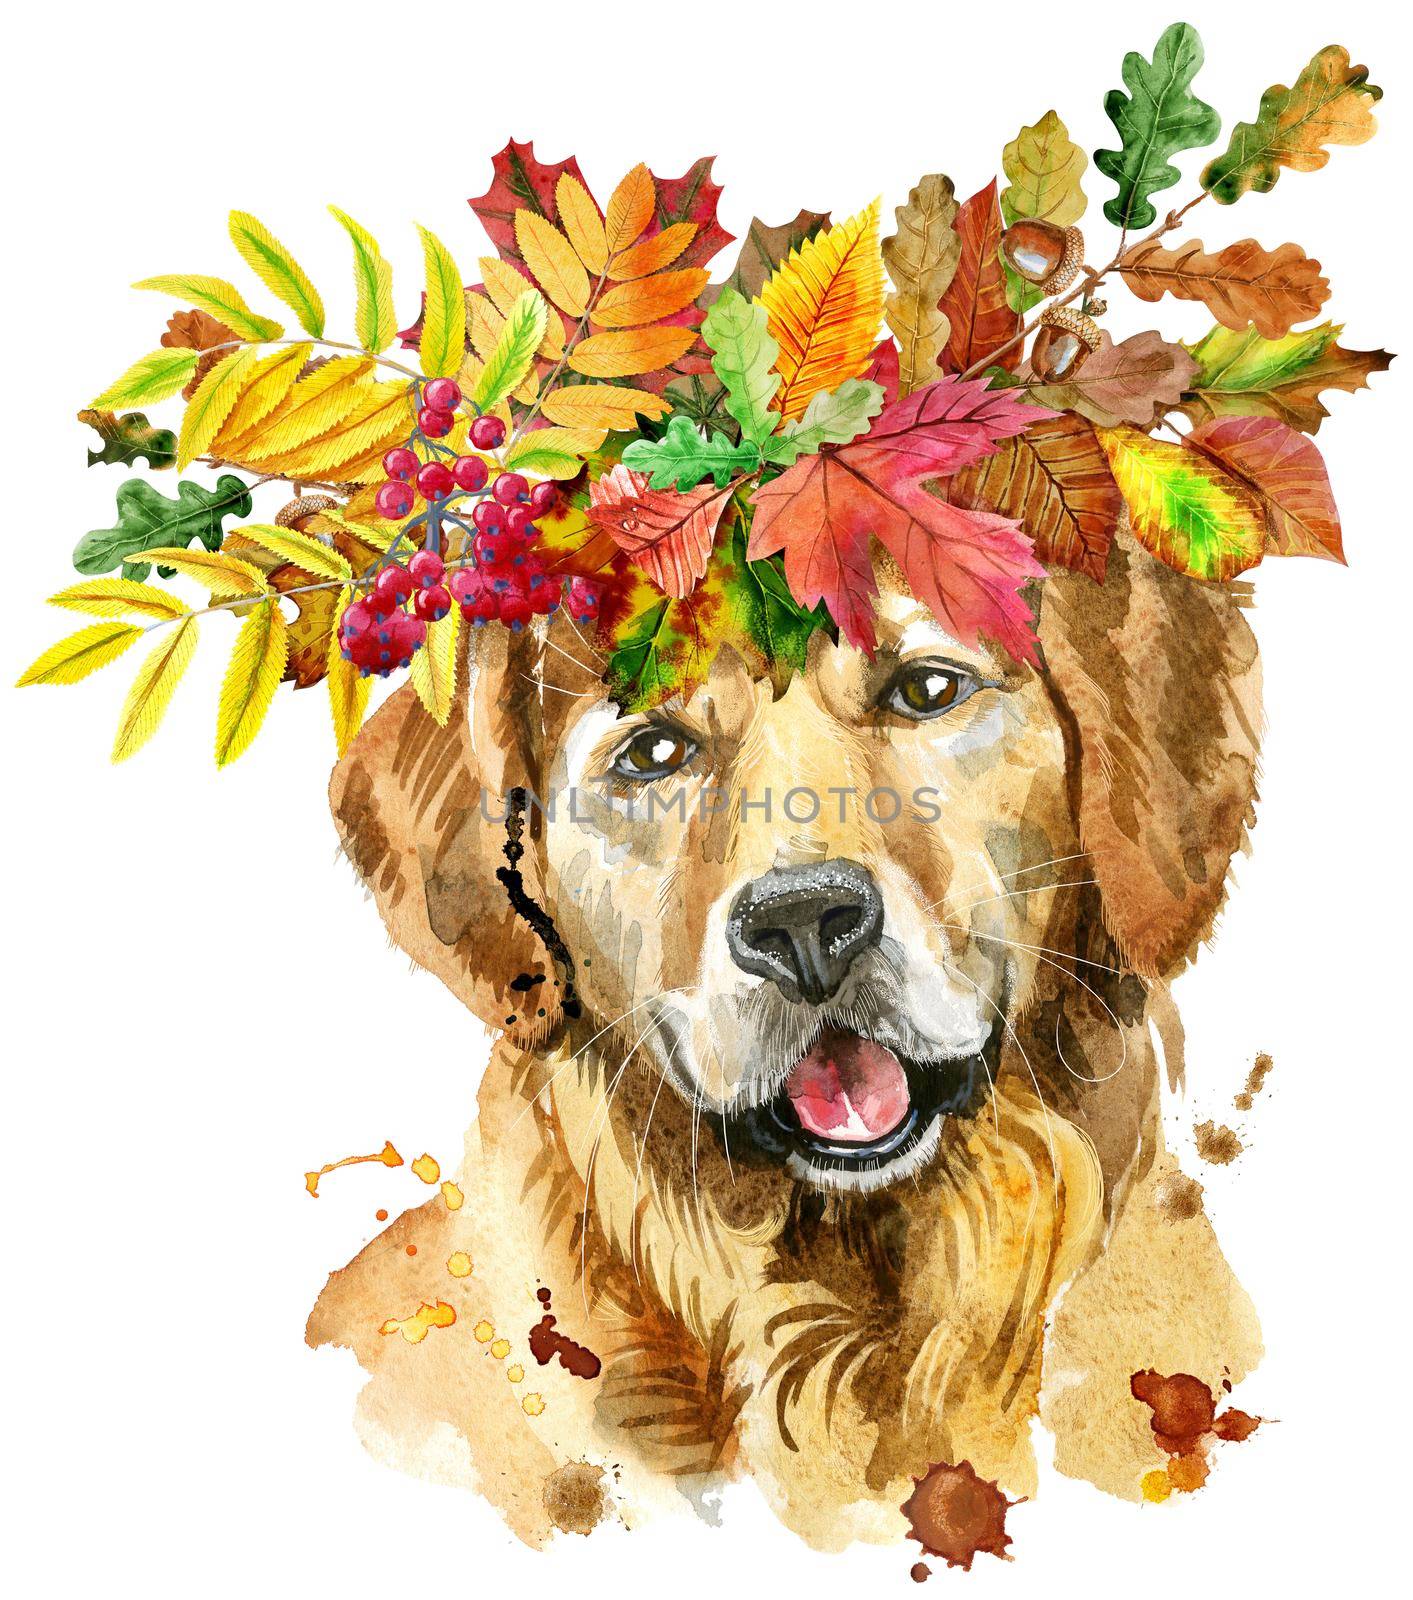 Cute Dog. Dog T-shirt graphics. watercolor golden retriever illustration in a Cute Dog with wreath of autumn leaves